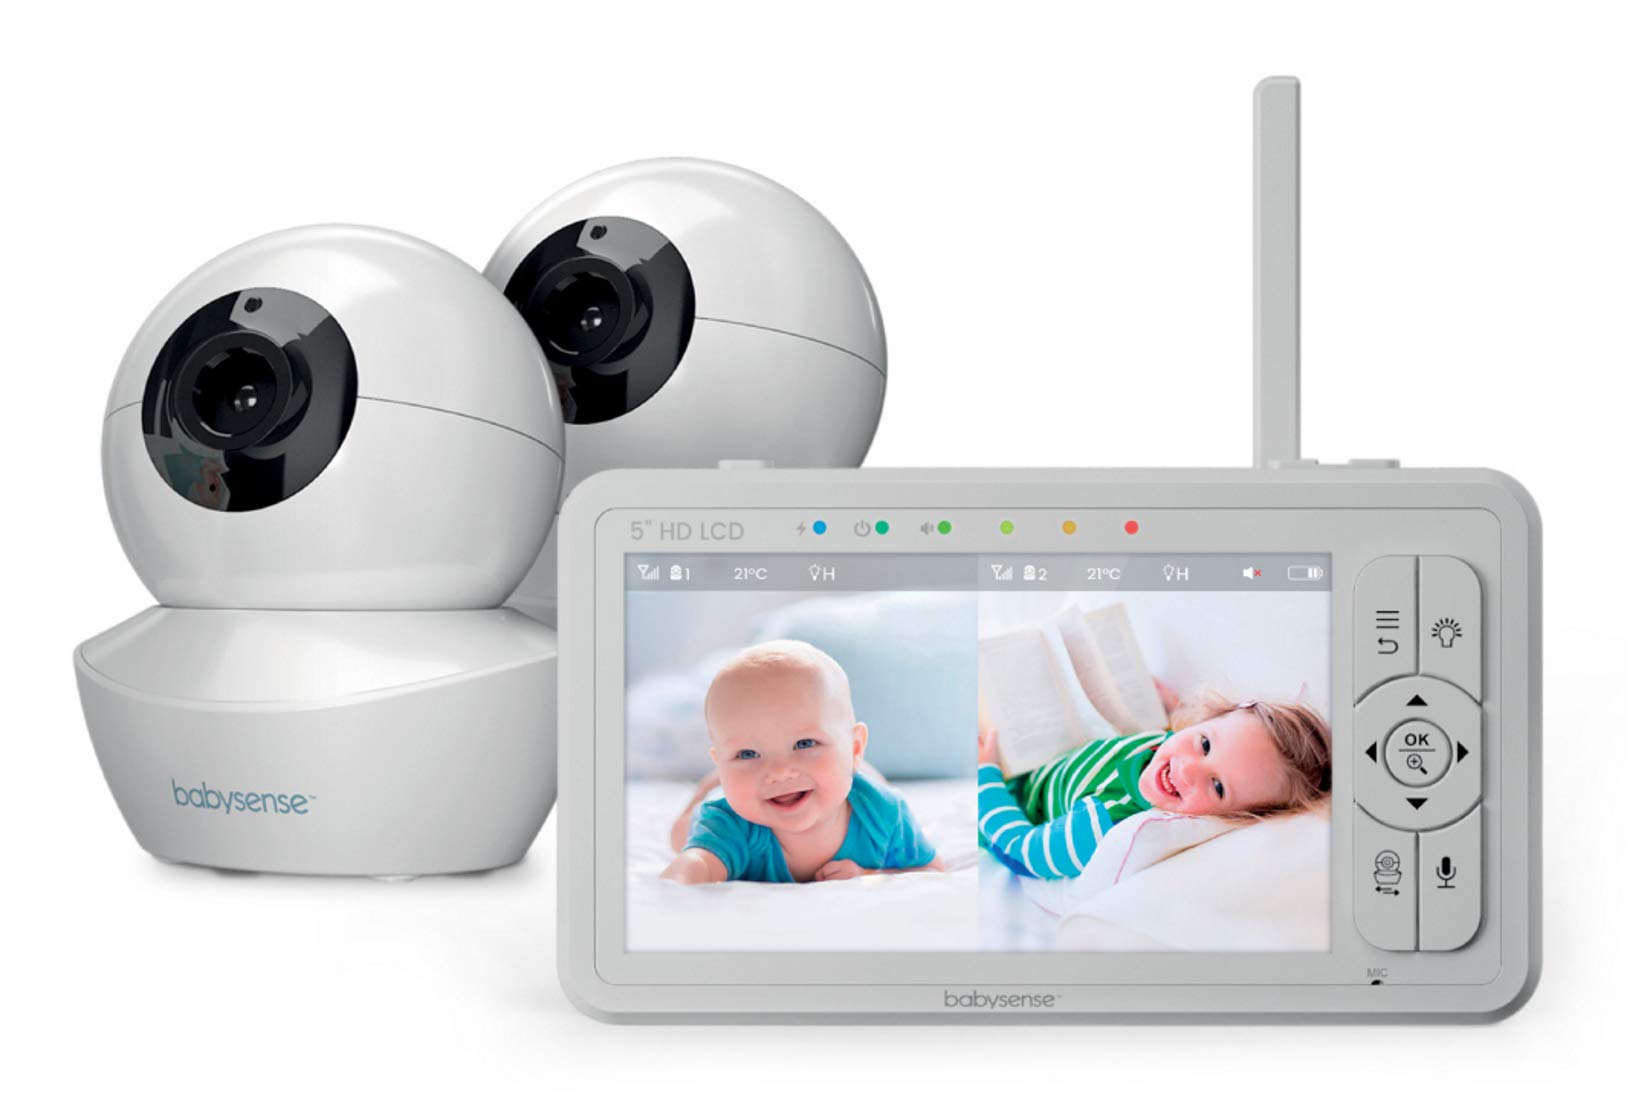 5" HD Split-Screen Baby Monitor, Babysense Video Baby Monitor with Camera and Audio, Two HD Cameras with Remote PTZ, Night Light, 300m Range, Two-Way Audio, 4x Zoom, Night Light, 4000mAh Battery